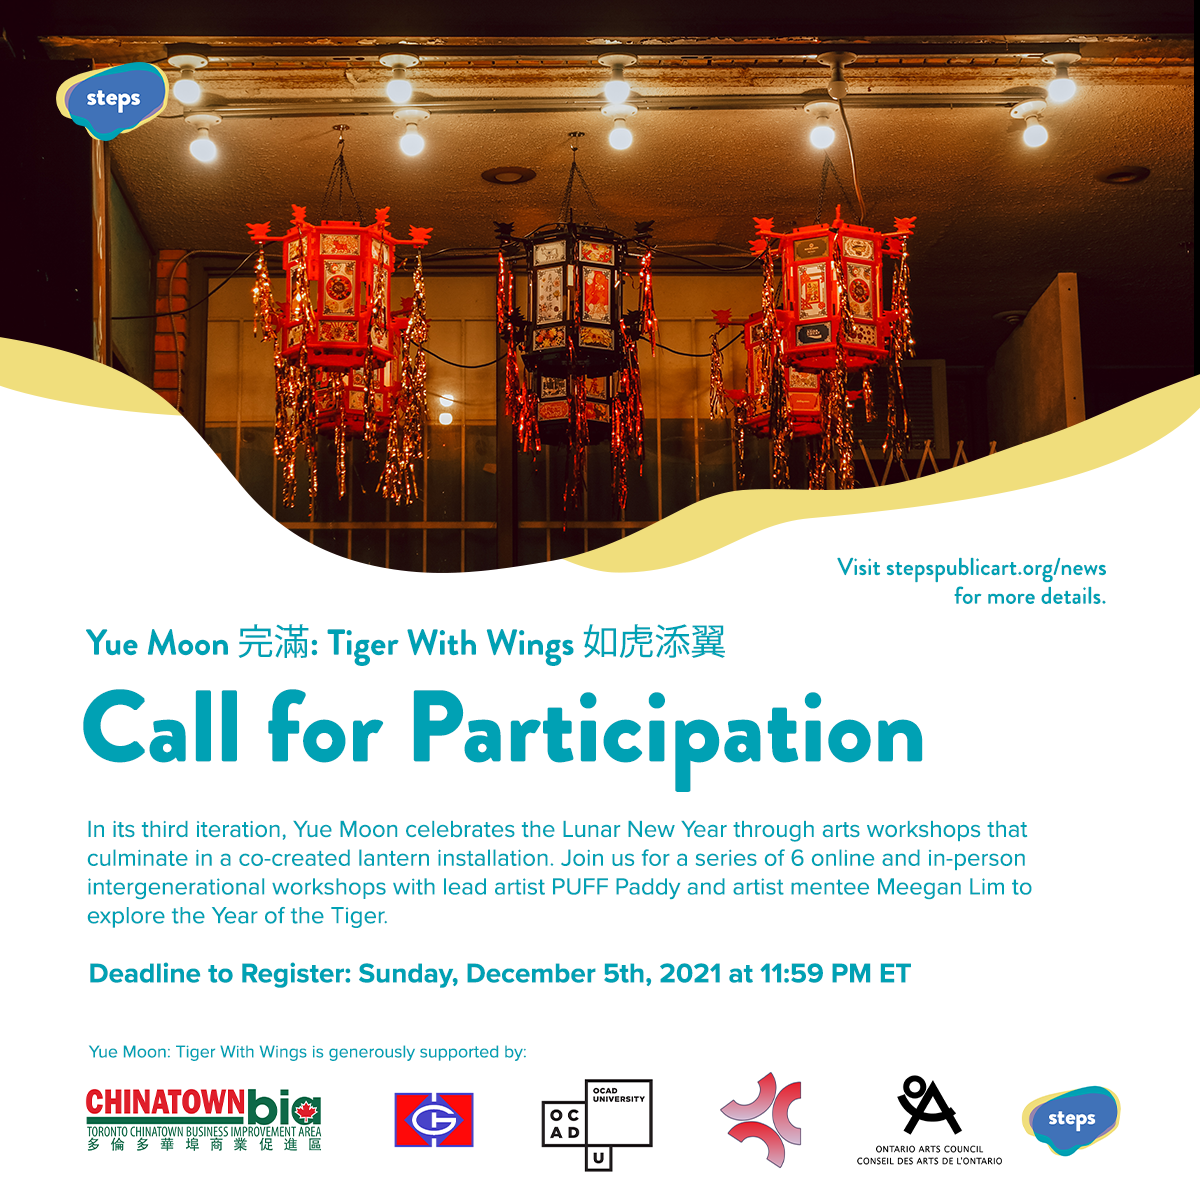 Square graphic design with a photo banner of red & black lanterns, the bottom has a white background and yellow accents. It has teal text that writes: “Yue Moon 完滿: Tiger With Wings 如虎添翼”, “Call for Participation” and details on the workshop including, “Deadline to Register: Sunday, Dec 5, 2021 at 11:59PM EST”. The bottom has a logo banner from partners/funders.